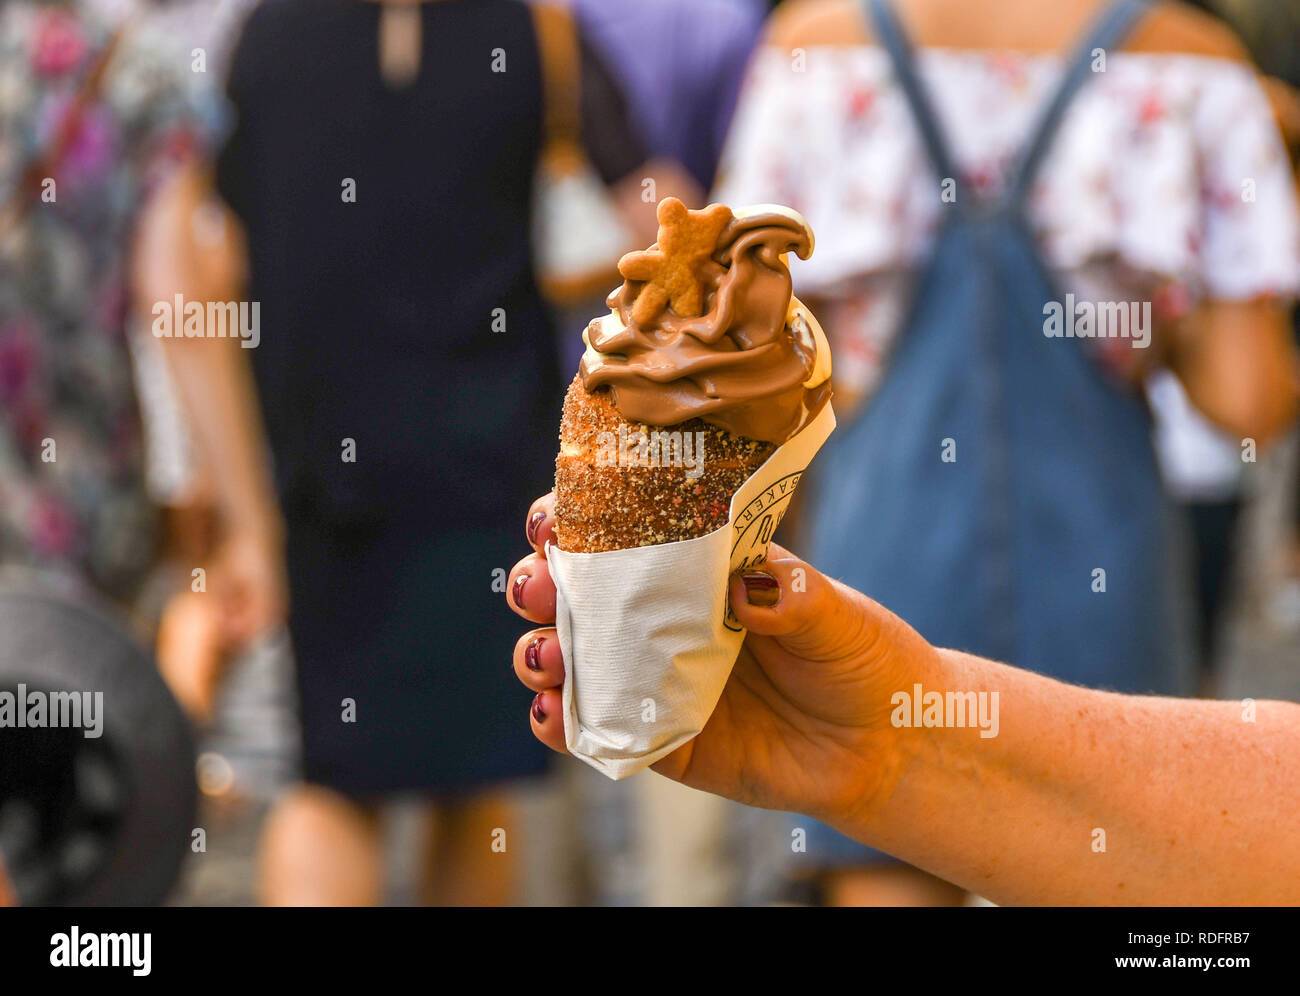 PRAGUE, CZECH REPUBLIC - AUGUST 2018: Person in Prague holding a trdelník chimney, which is a cinnamon pastry filled with soft serve ice cream Stock Photo